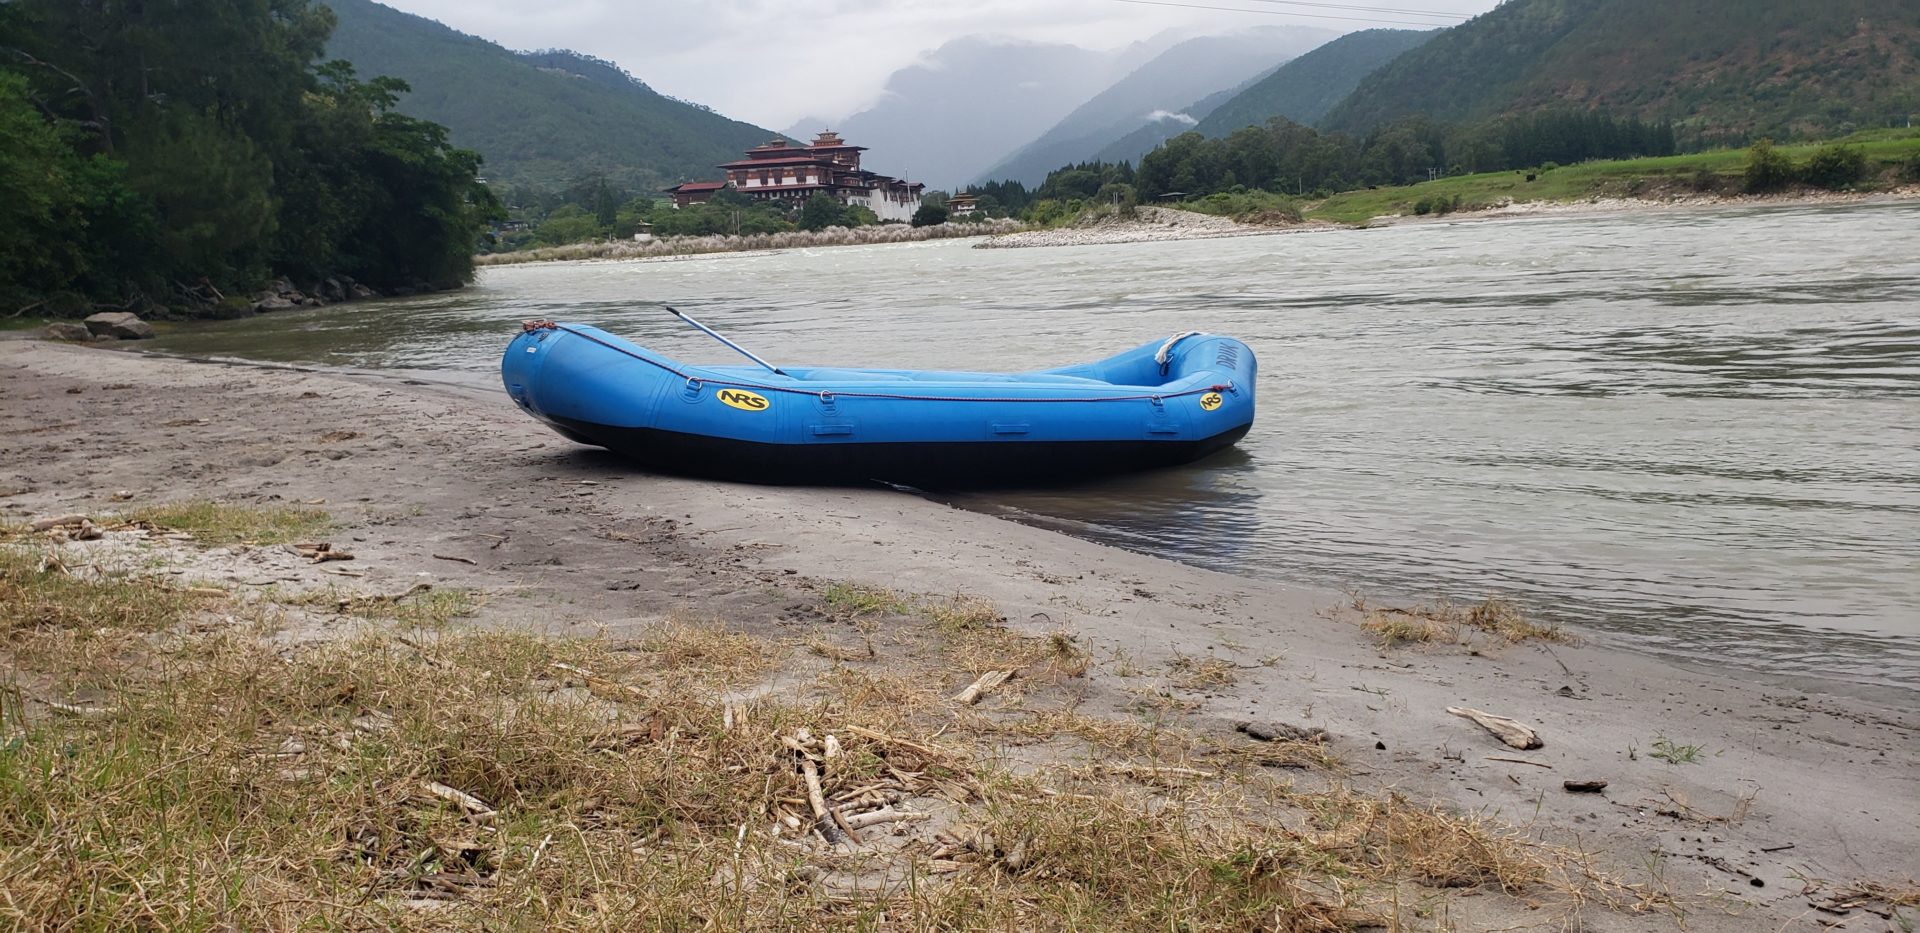 a blue raft on a river